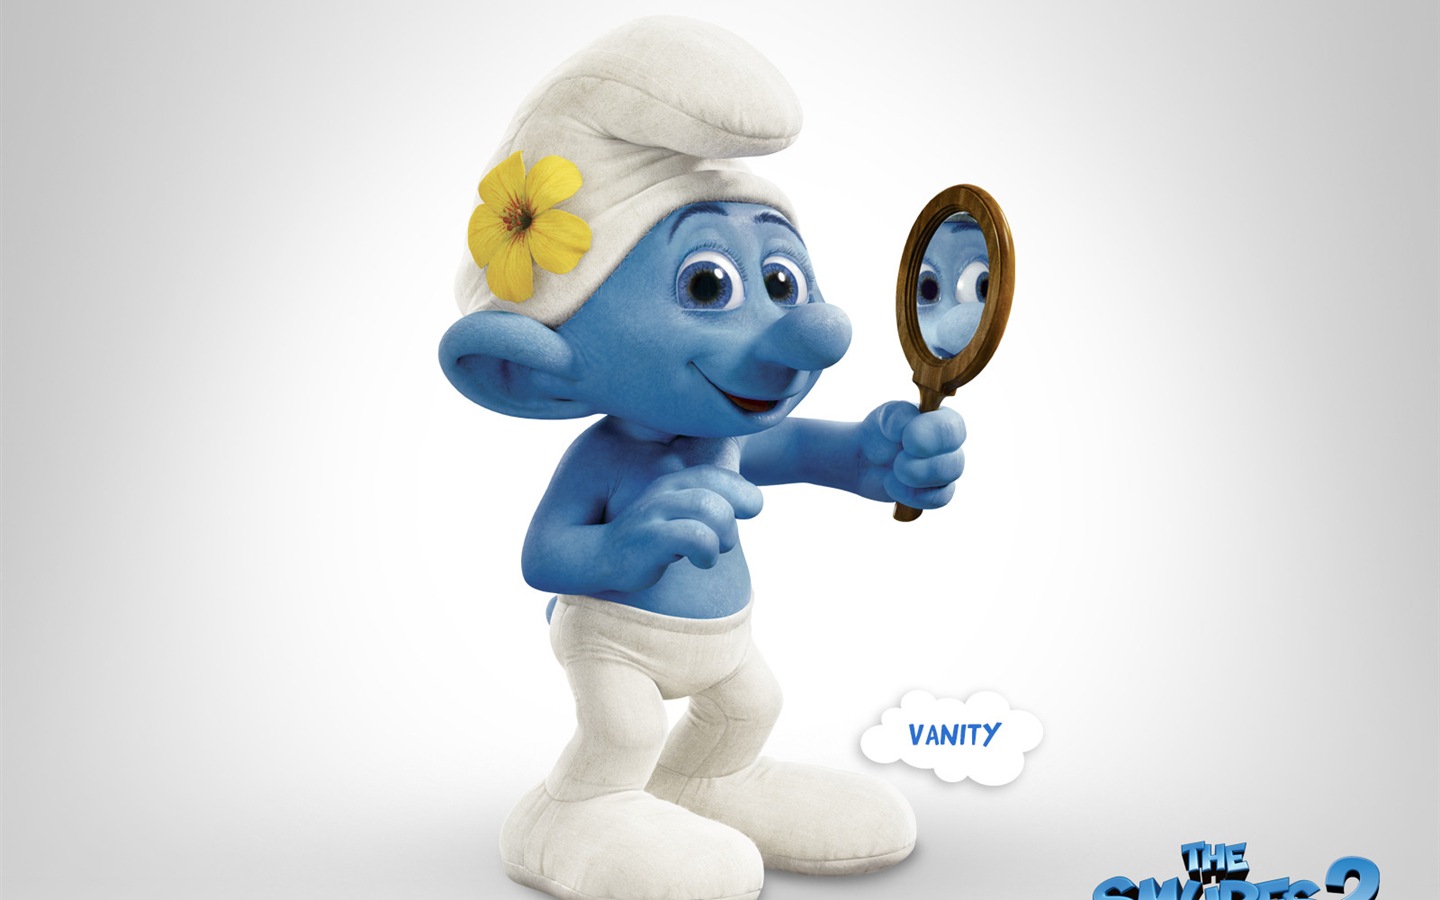 The Smurfs 2 HD movie wallpapers #10 - 1440x900